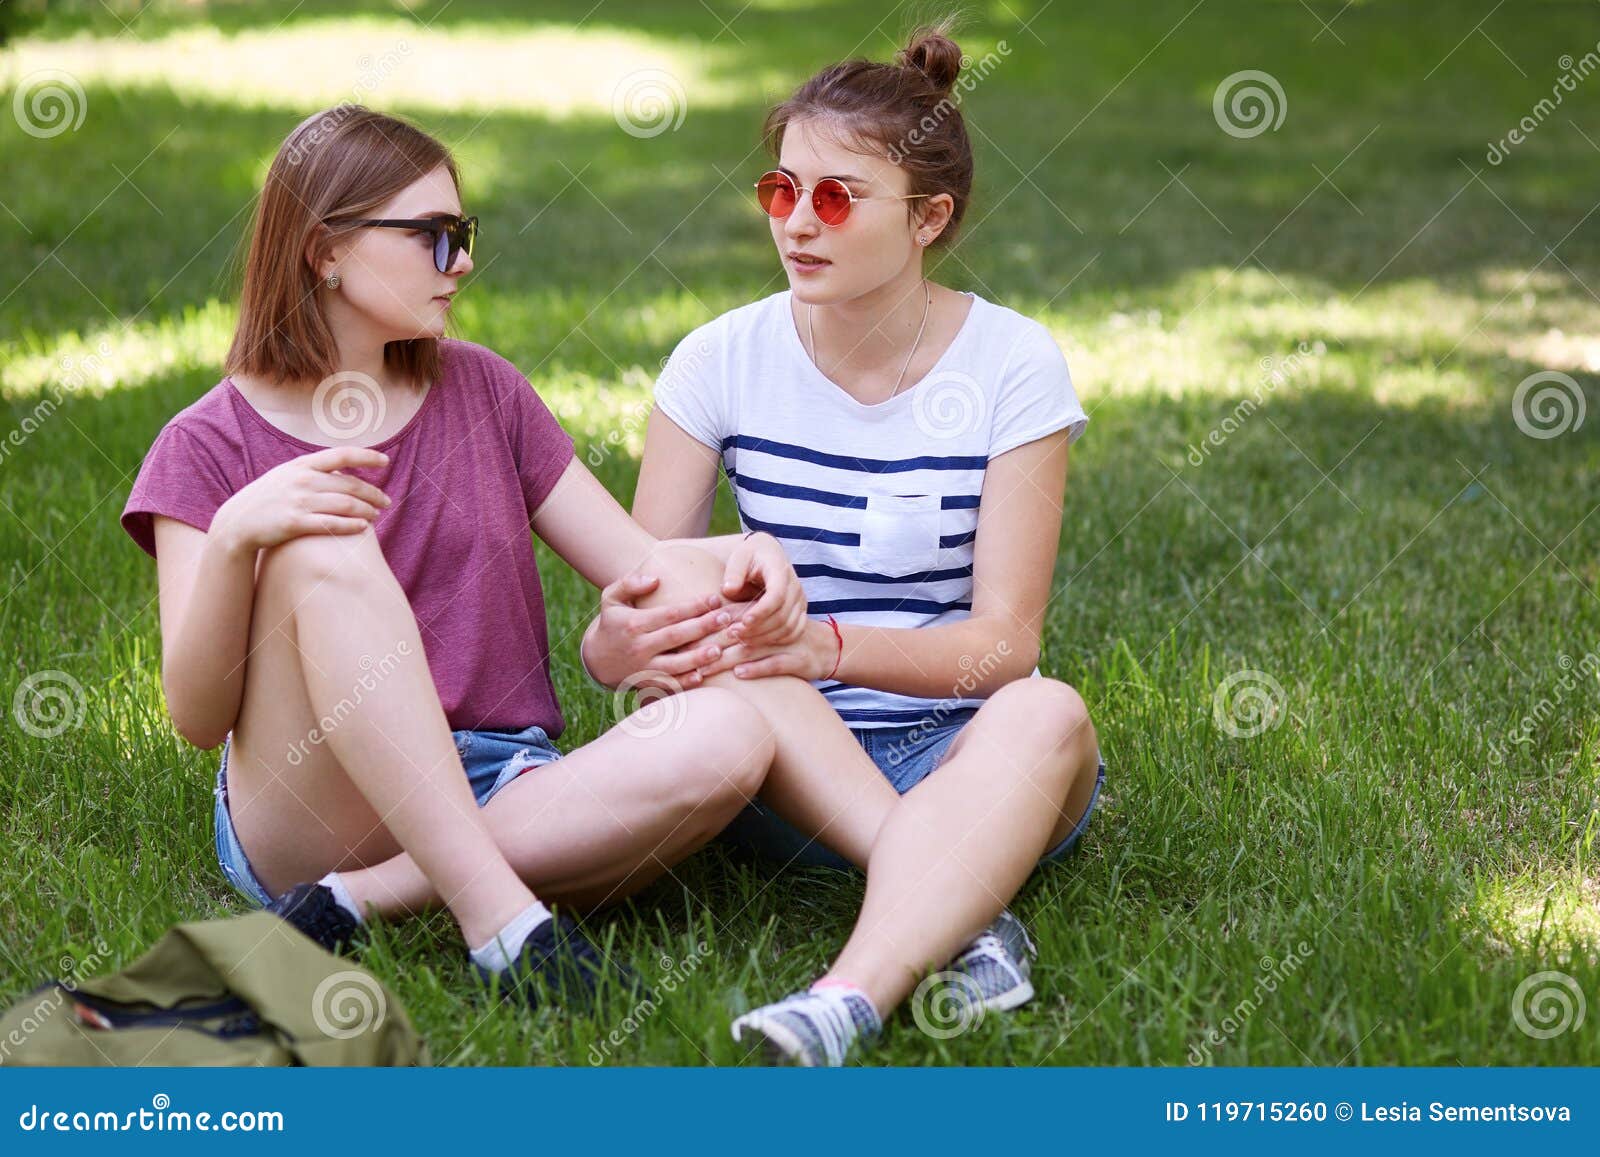 Women Lesbians Have Fun Together While Sit Crossed Legs On Green Grass Look With Love At Each